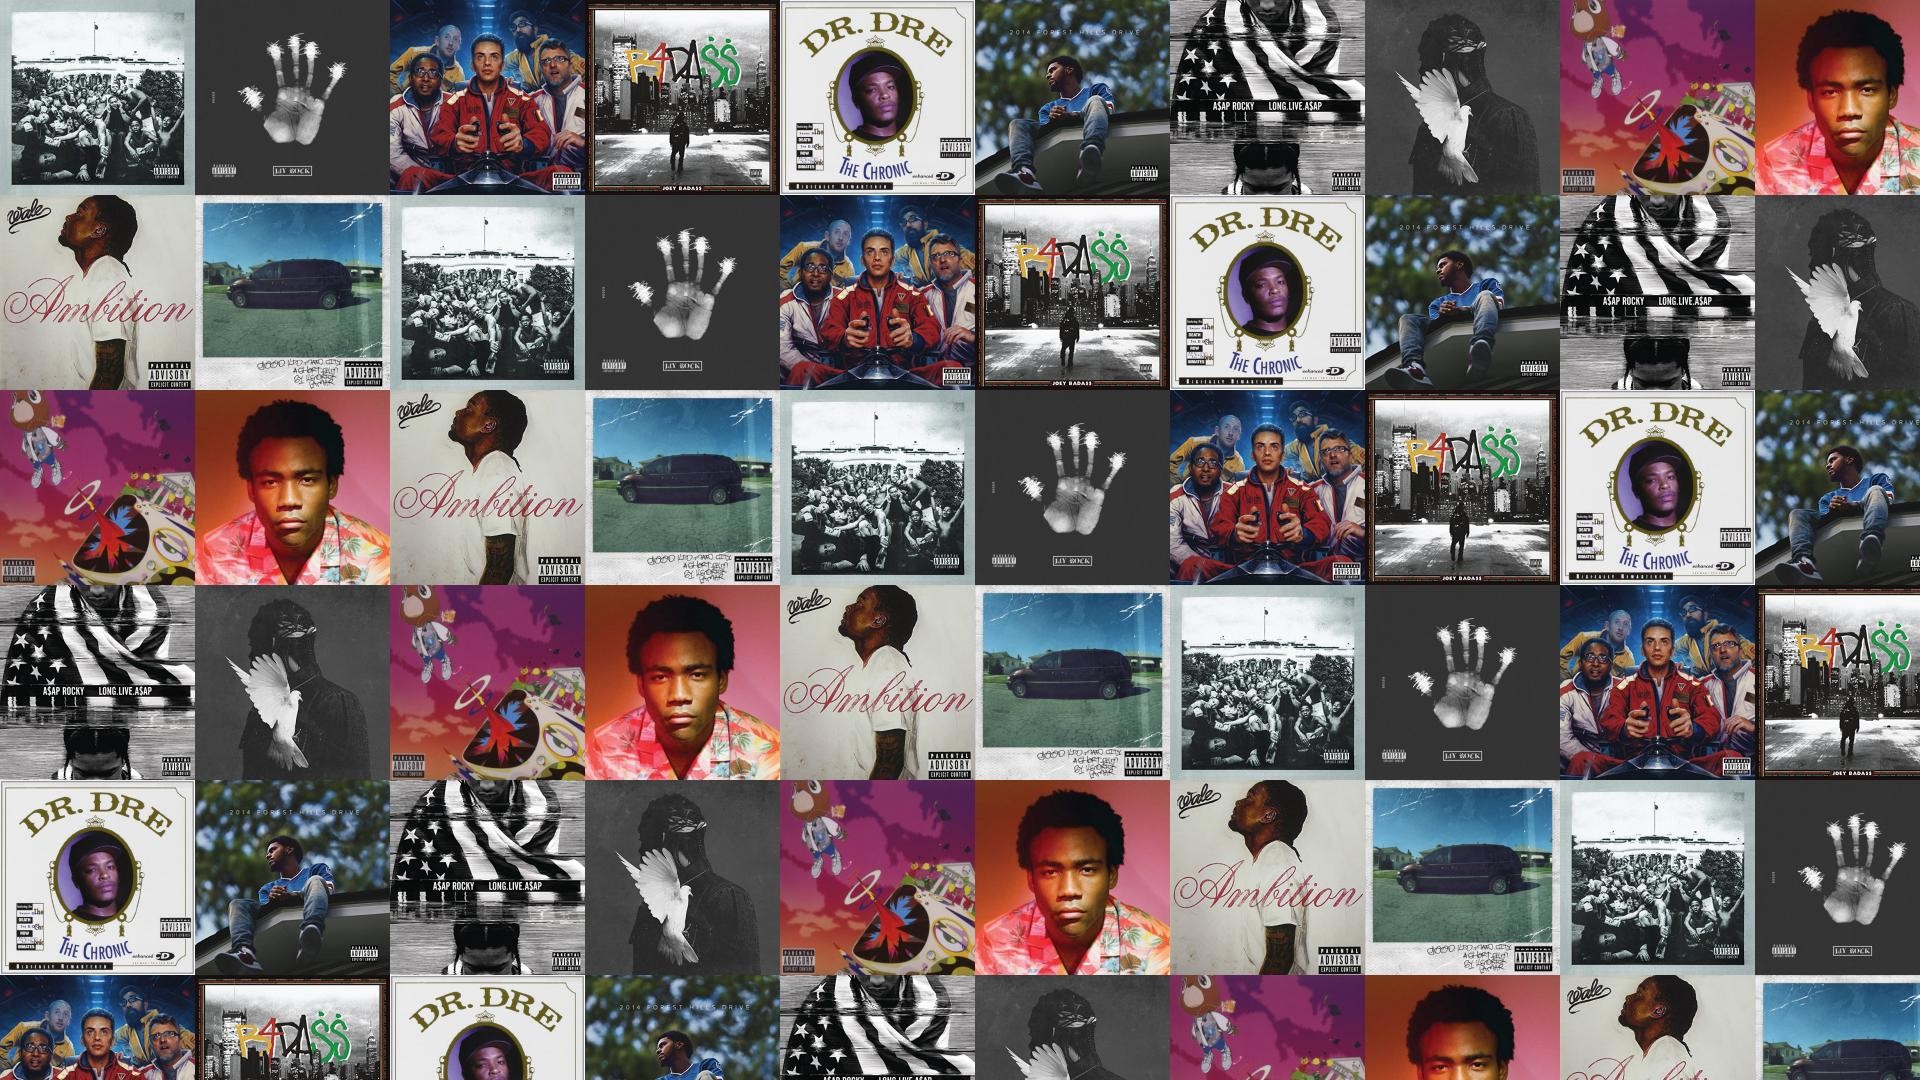 Download This Free Wallpaper With Images Of Kendrick - Collage - HD Wallpaper 